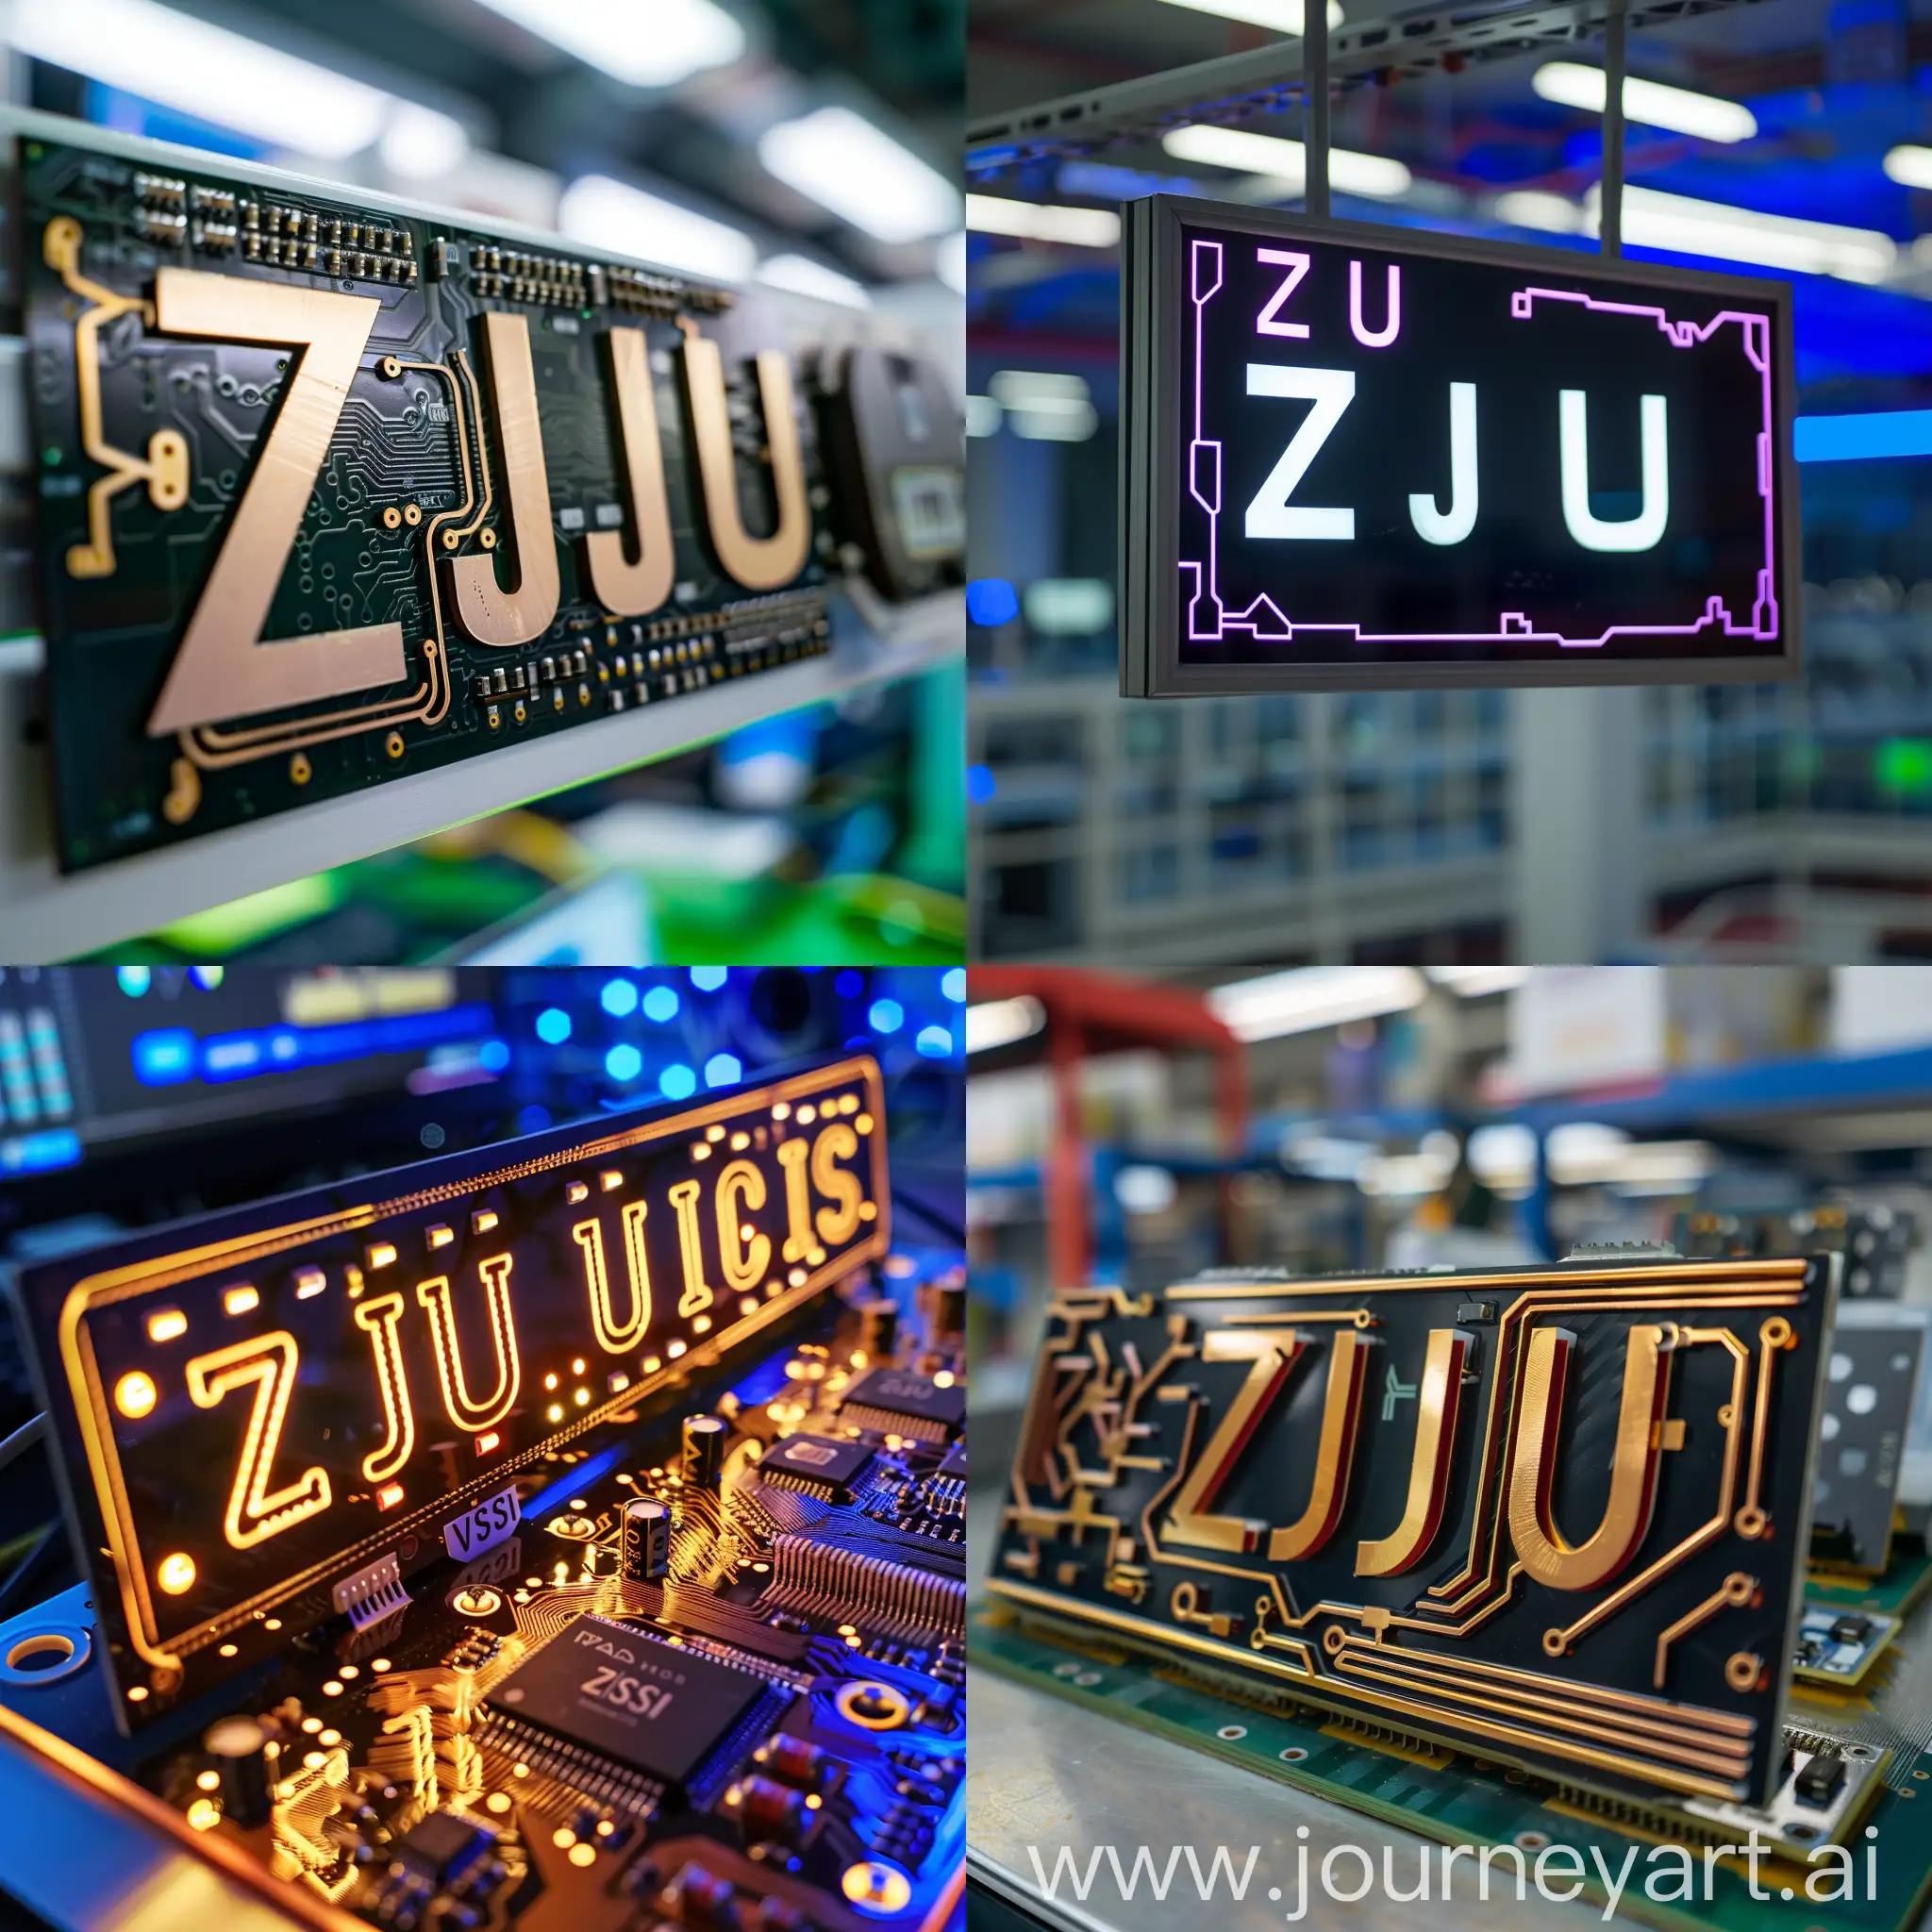 Modern-Laboratory-Signage-ZJU-and-VLSI-Text-in-Contemporary-Setting